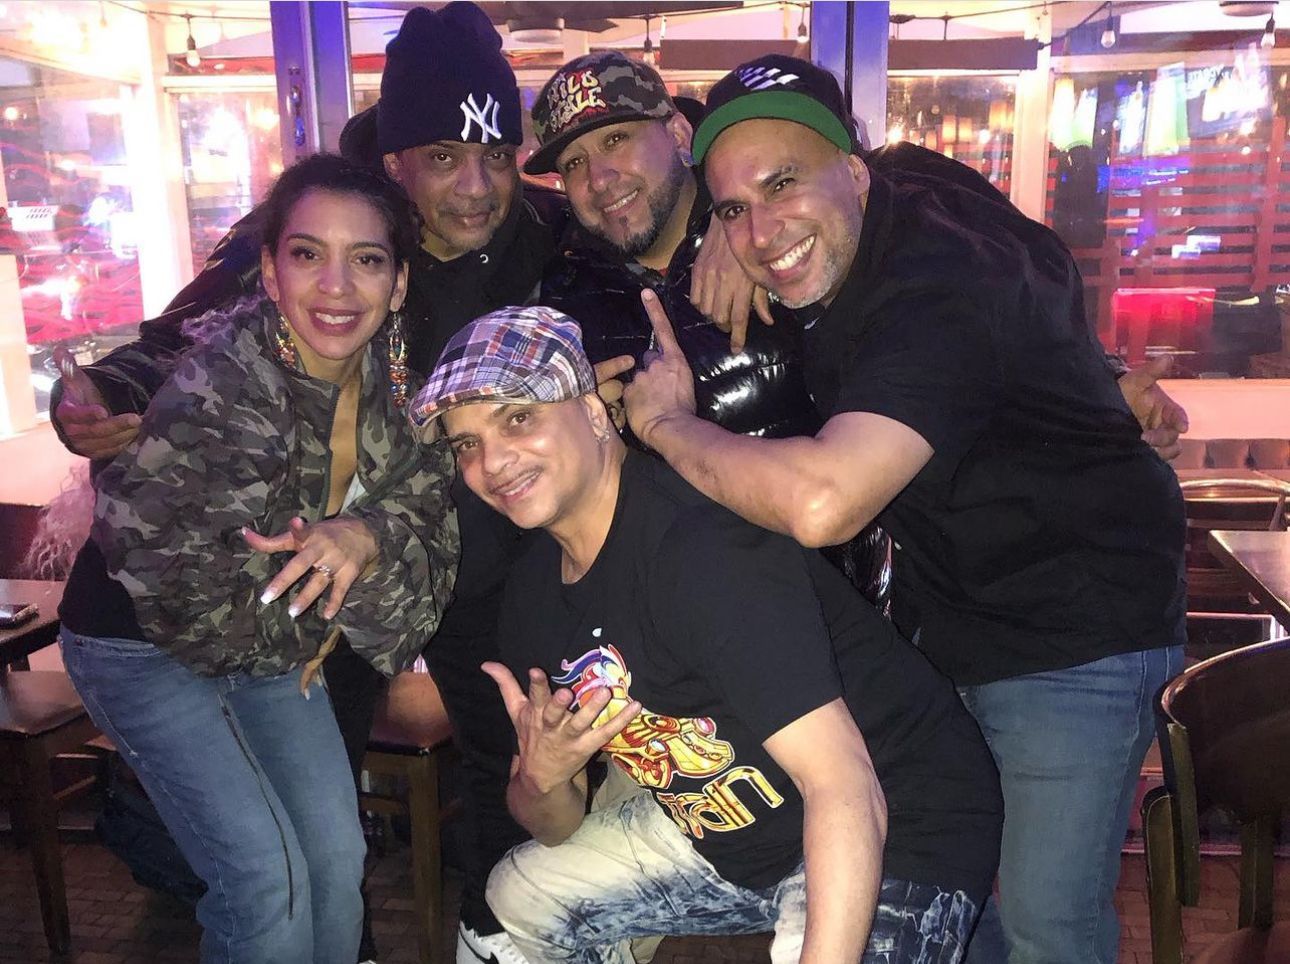 (Left to Right) Rok, Frank, Crz, DpOne, Kwik at DP's birthday at Barrio BX.